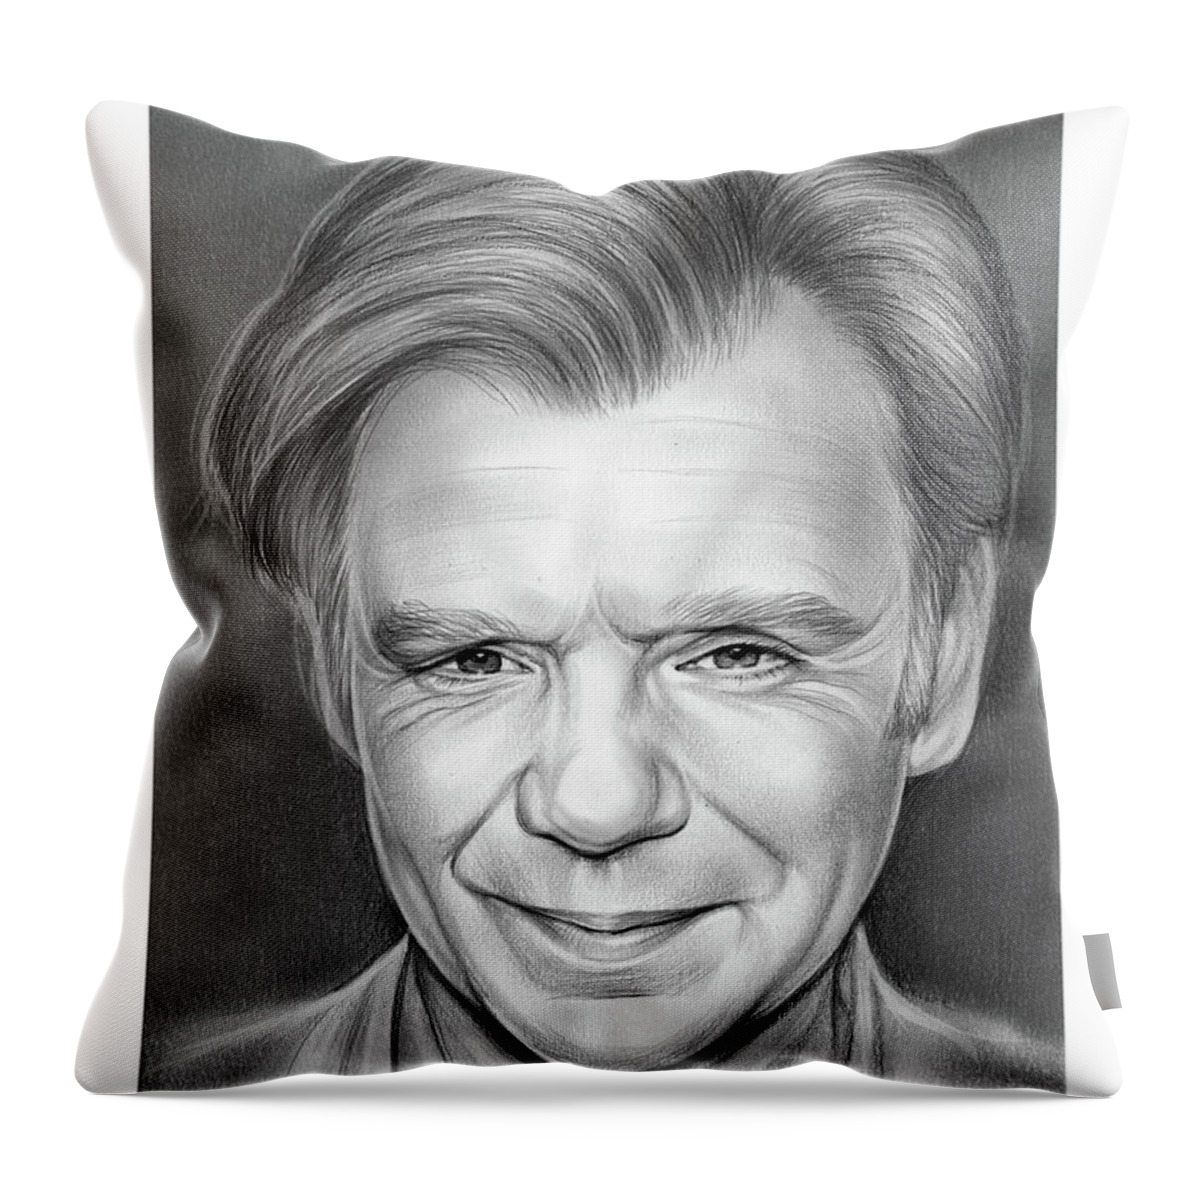 David Caruso Throw Pillow featuring the drawing David Caruso by Greg Joens